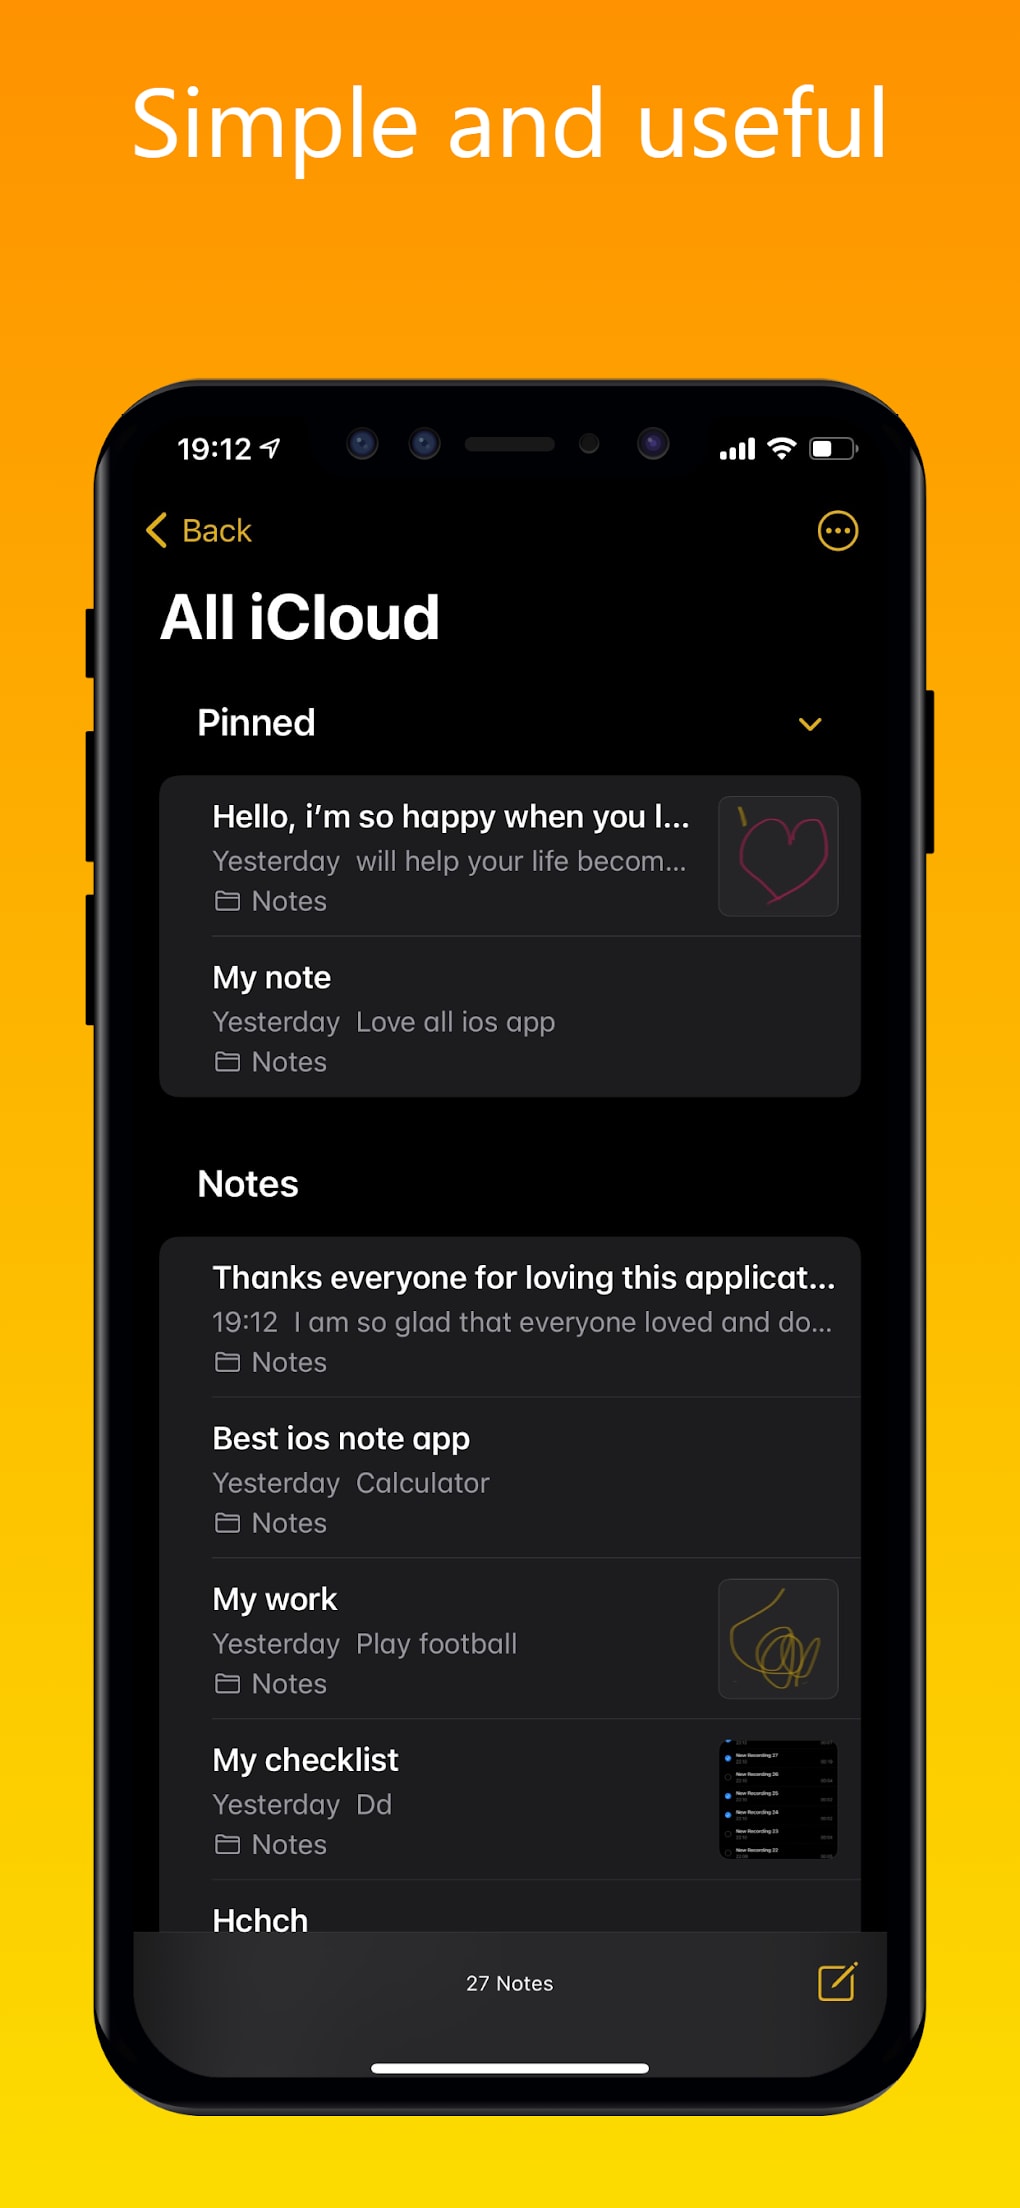 iNotes APK for Android Download